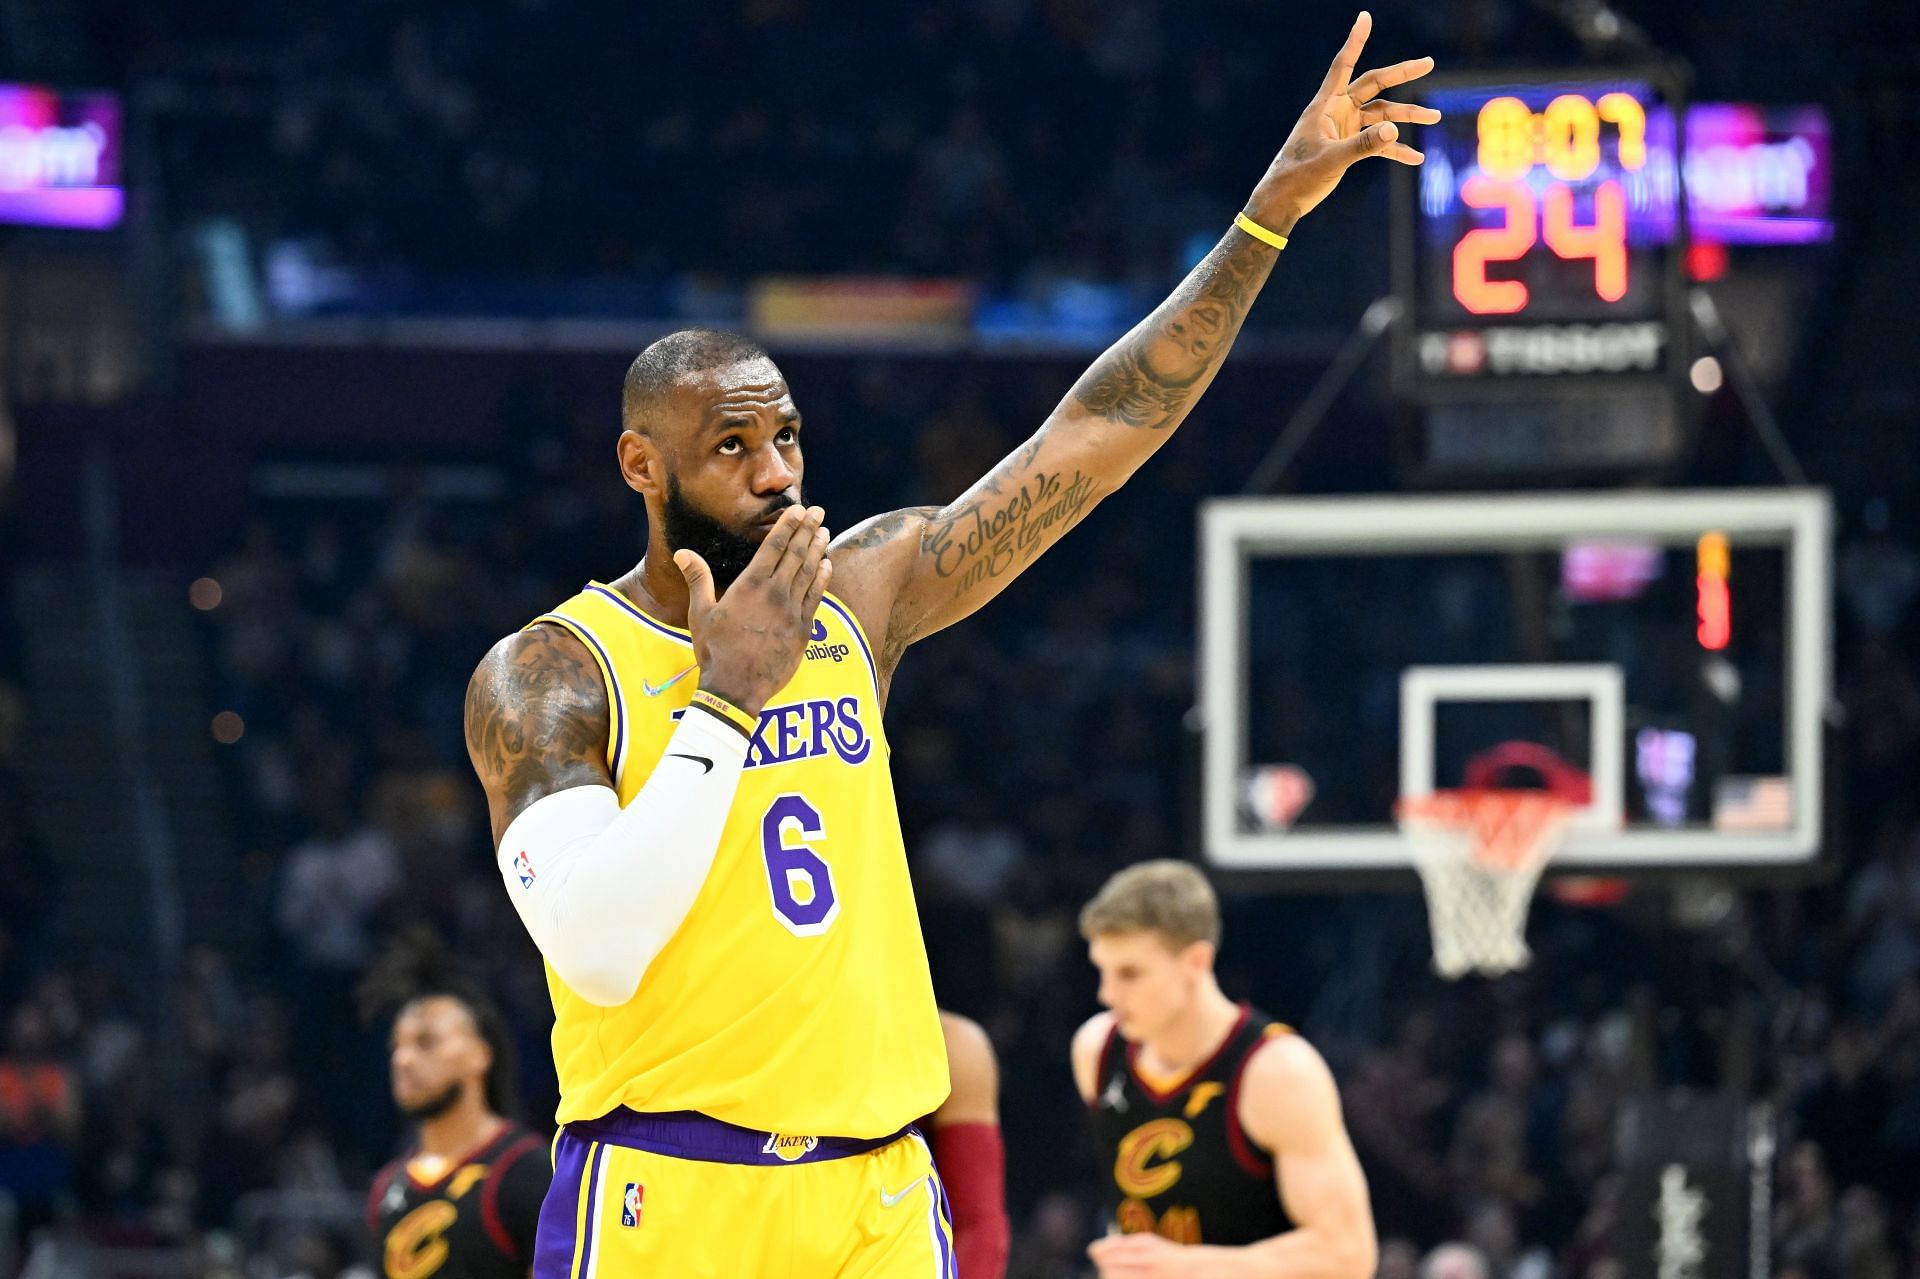 LA Lakers vs. Cleveland Cavaliers: LeBron James celebrates love from the crowd.